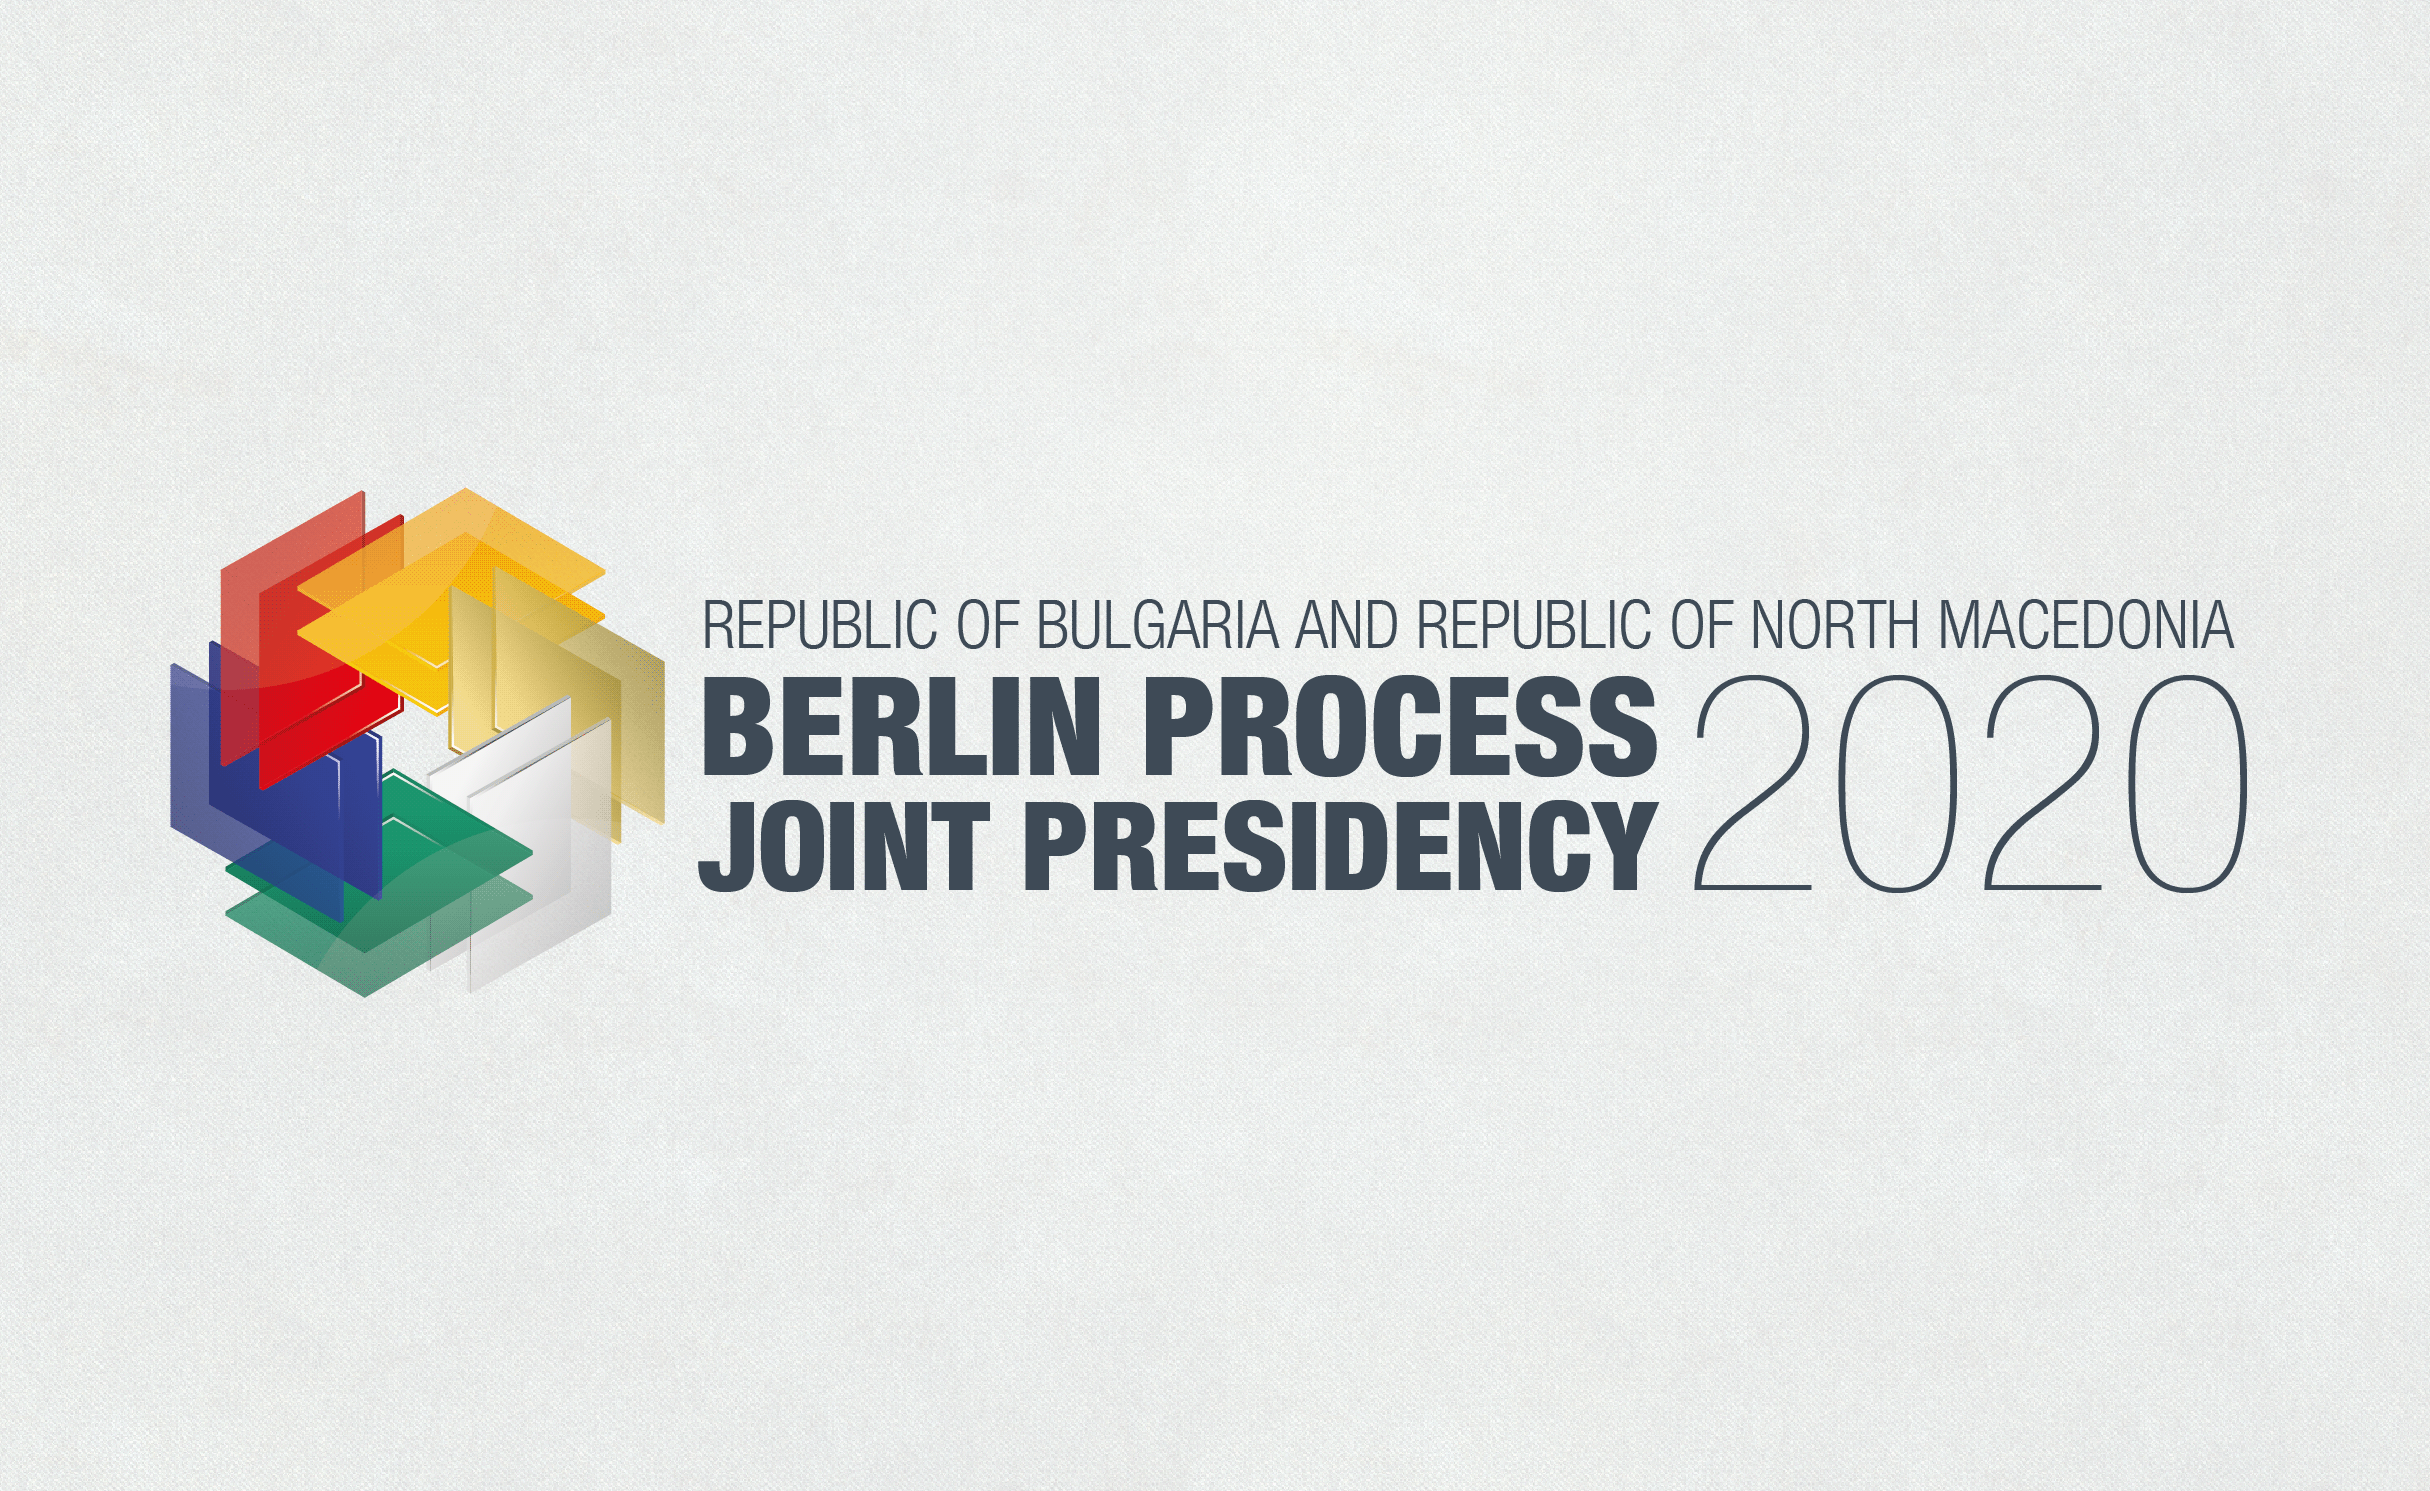 The Joint Chairmanship of the Republic of Bulgaria and the Republic of North Macedonia of the Berlin Process for the Western Balkans organizes a Meeting of the Ministers of Foreign Affairs, VTC format, on 9 of November 2020